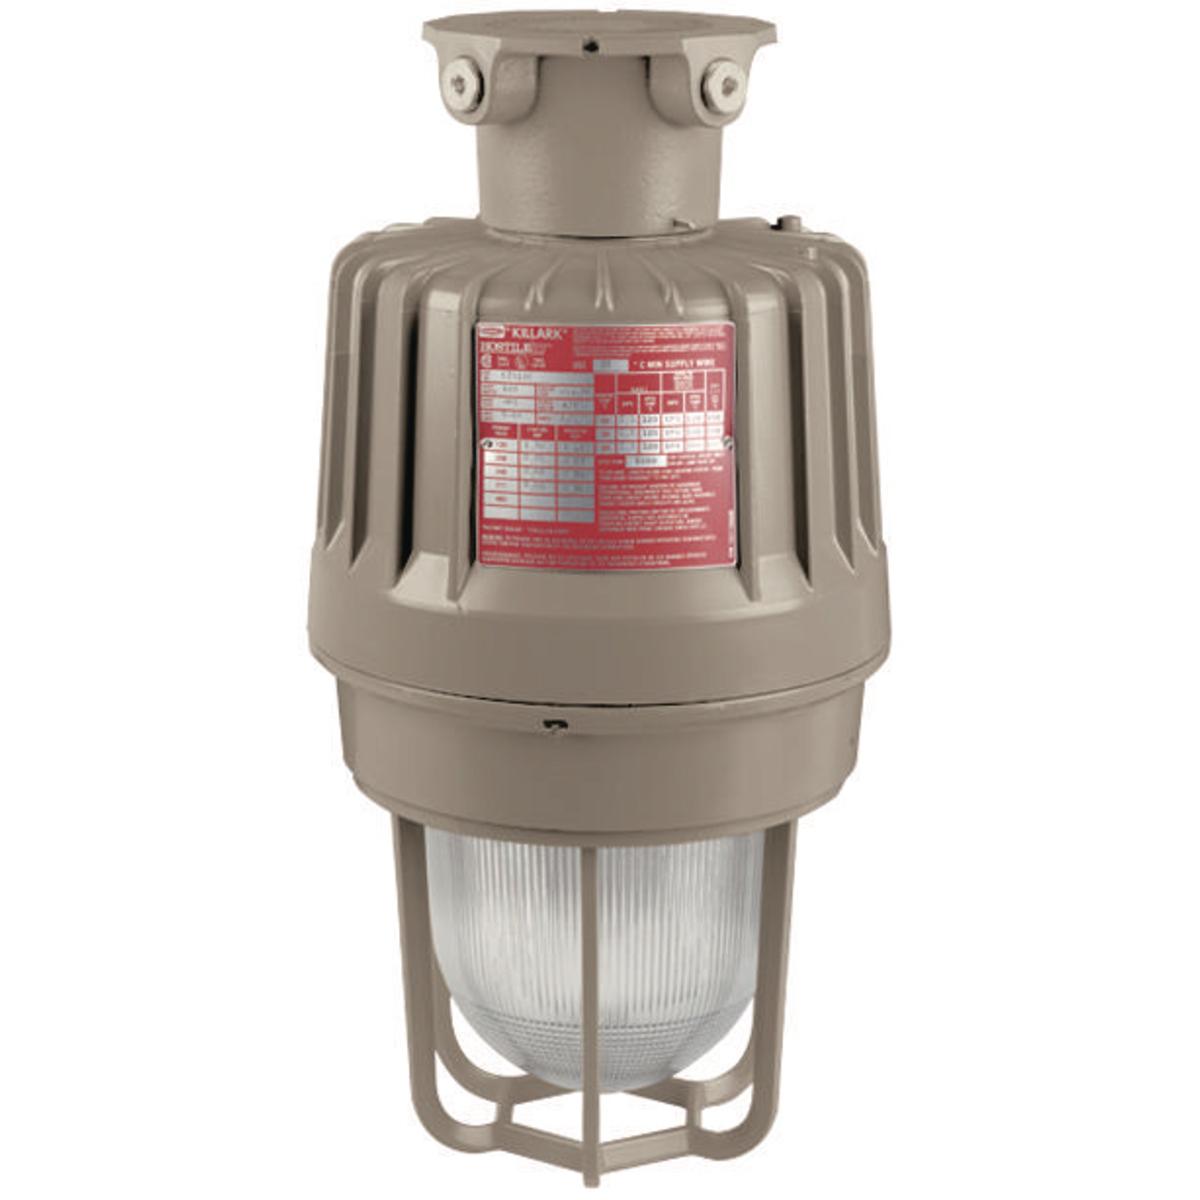 Hubbell EZS075X3 70W 480V High Pressure Sodium 1" Ceiling Mount  ; Three light sources – High Pressure Sodium (50-400W), Metal Halide (70-400W) and Pulse Start Metal Halide (175-400W) ; Mounting choice –Pendant, ceiling, 25˚ stanchion or 90˚ wall mount, all with “wireless